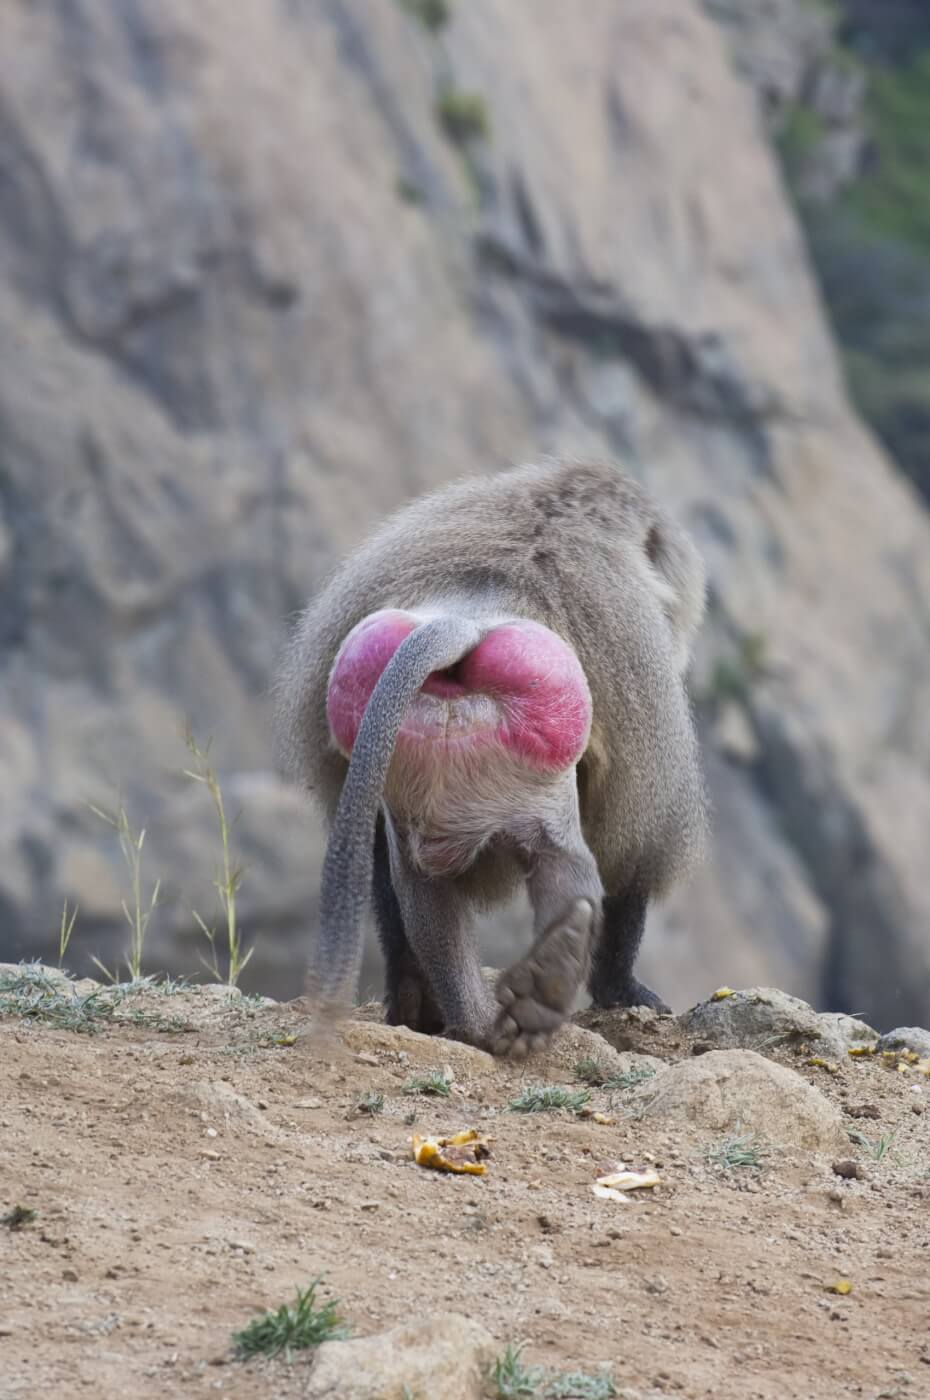 A baboon facing away from the camera, with swollen, red buttocks.